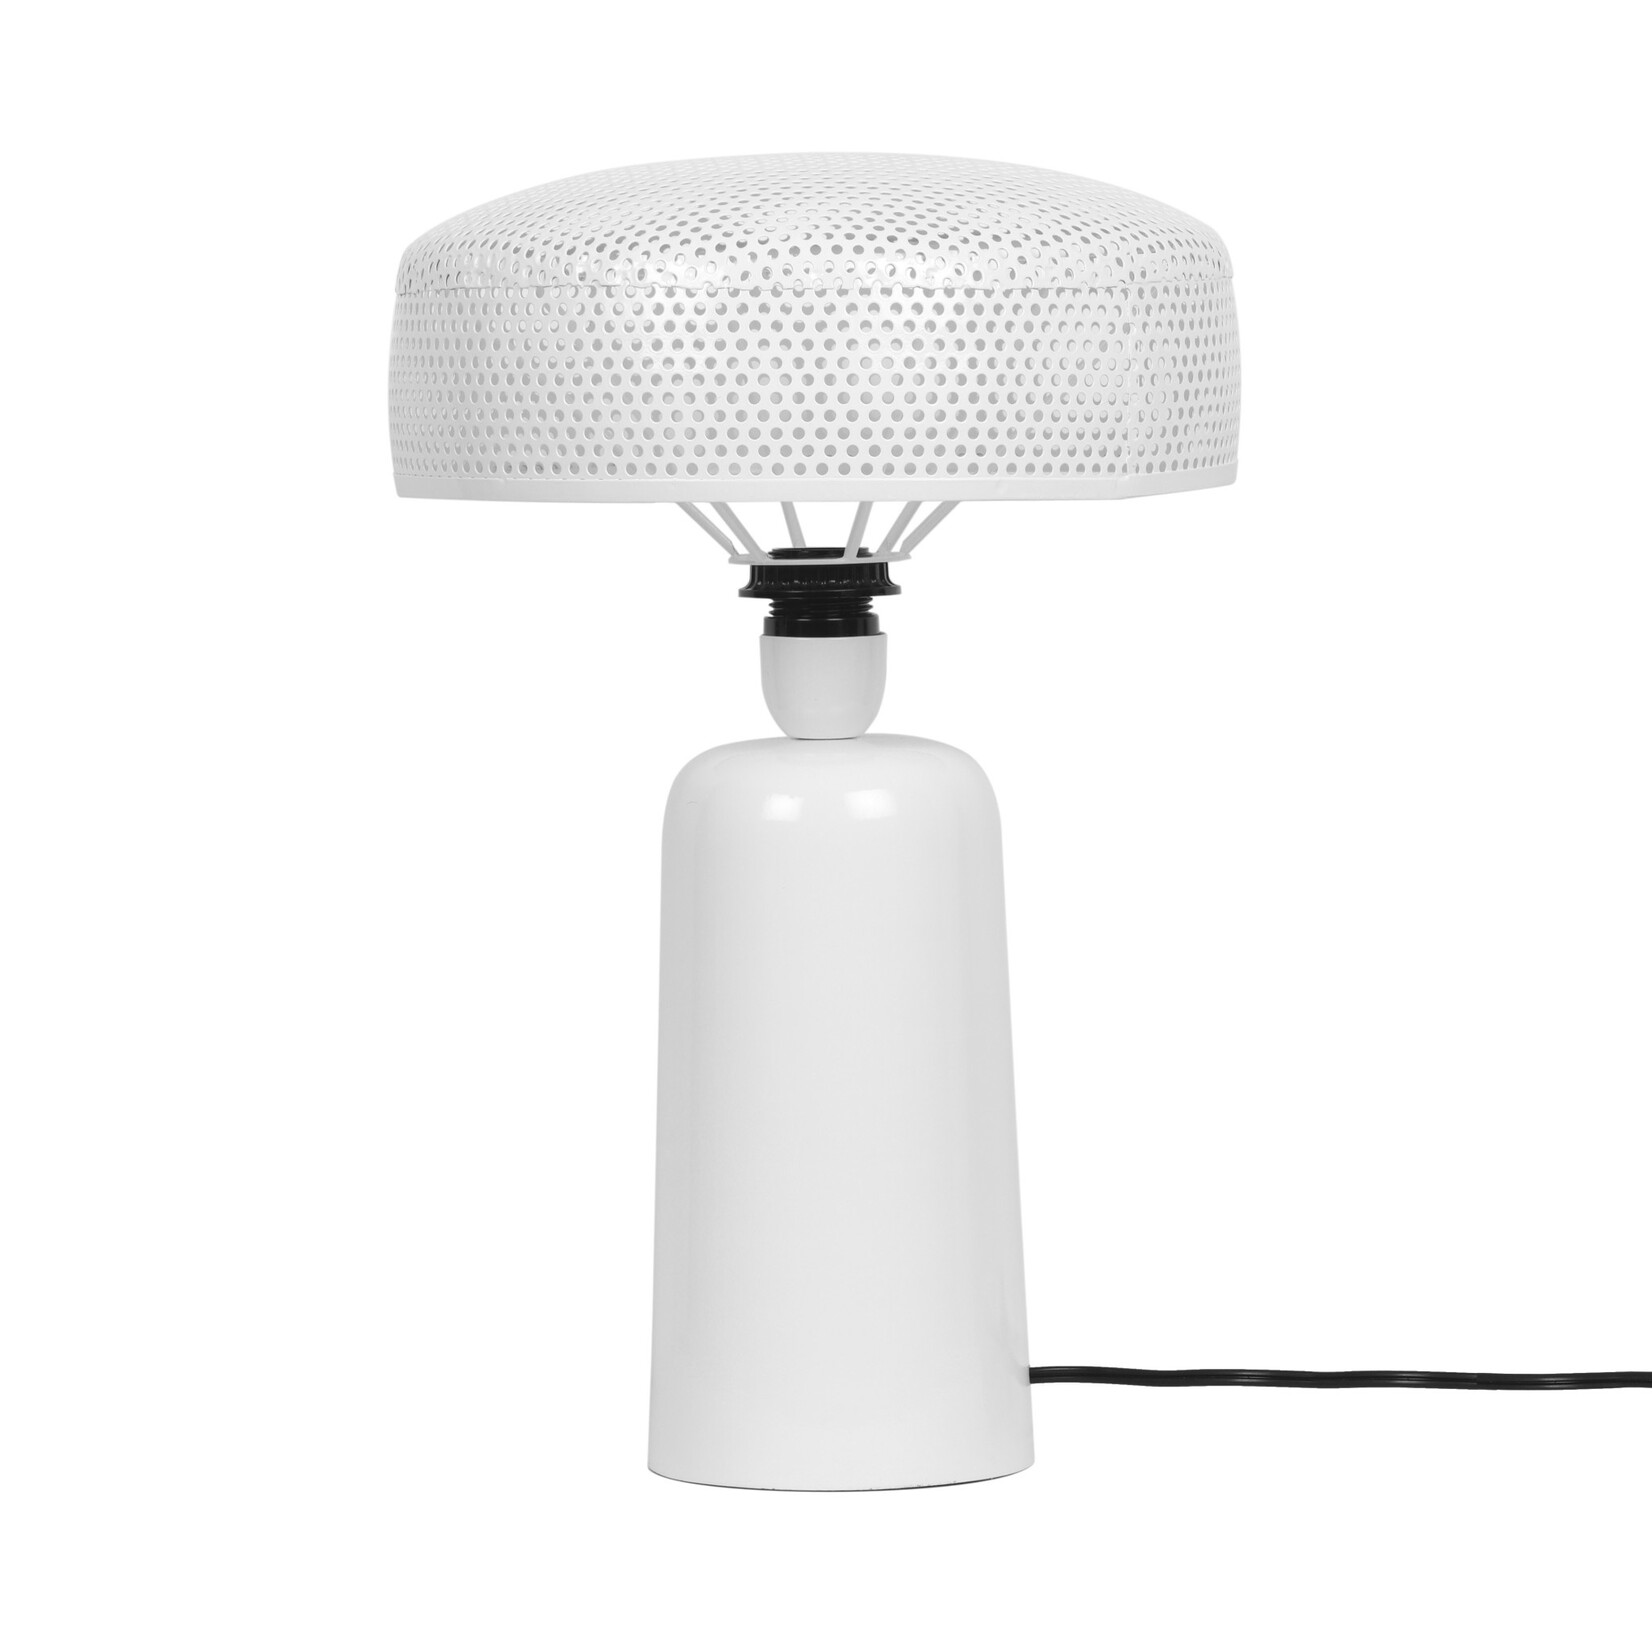 Tov GINDY WHITE METAL TABLE LAMP